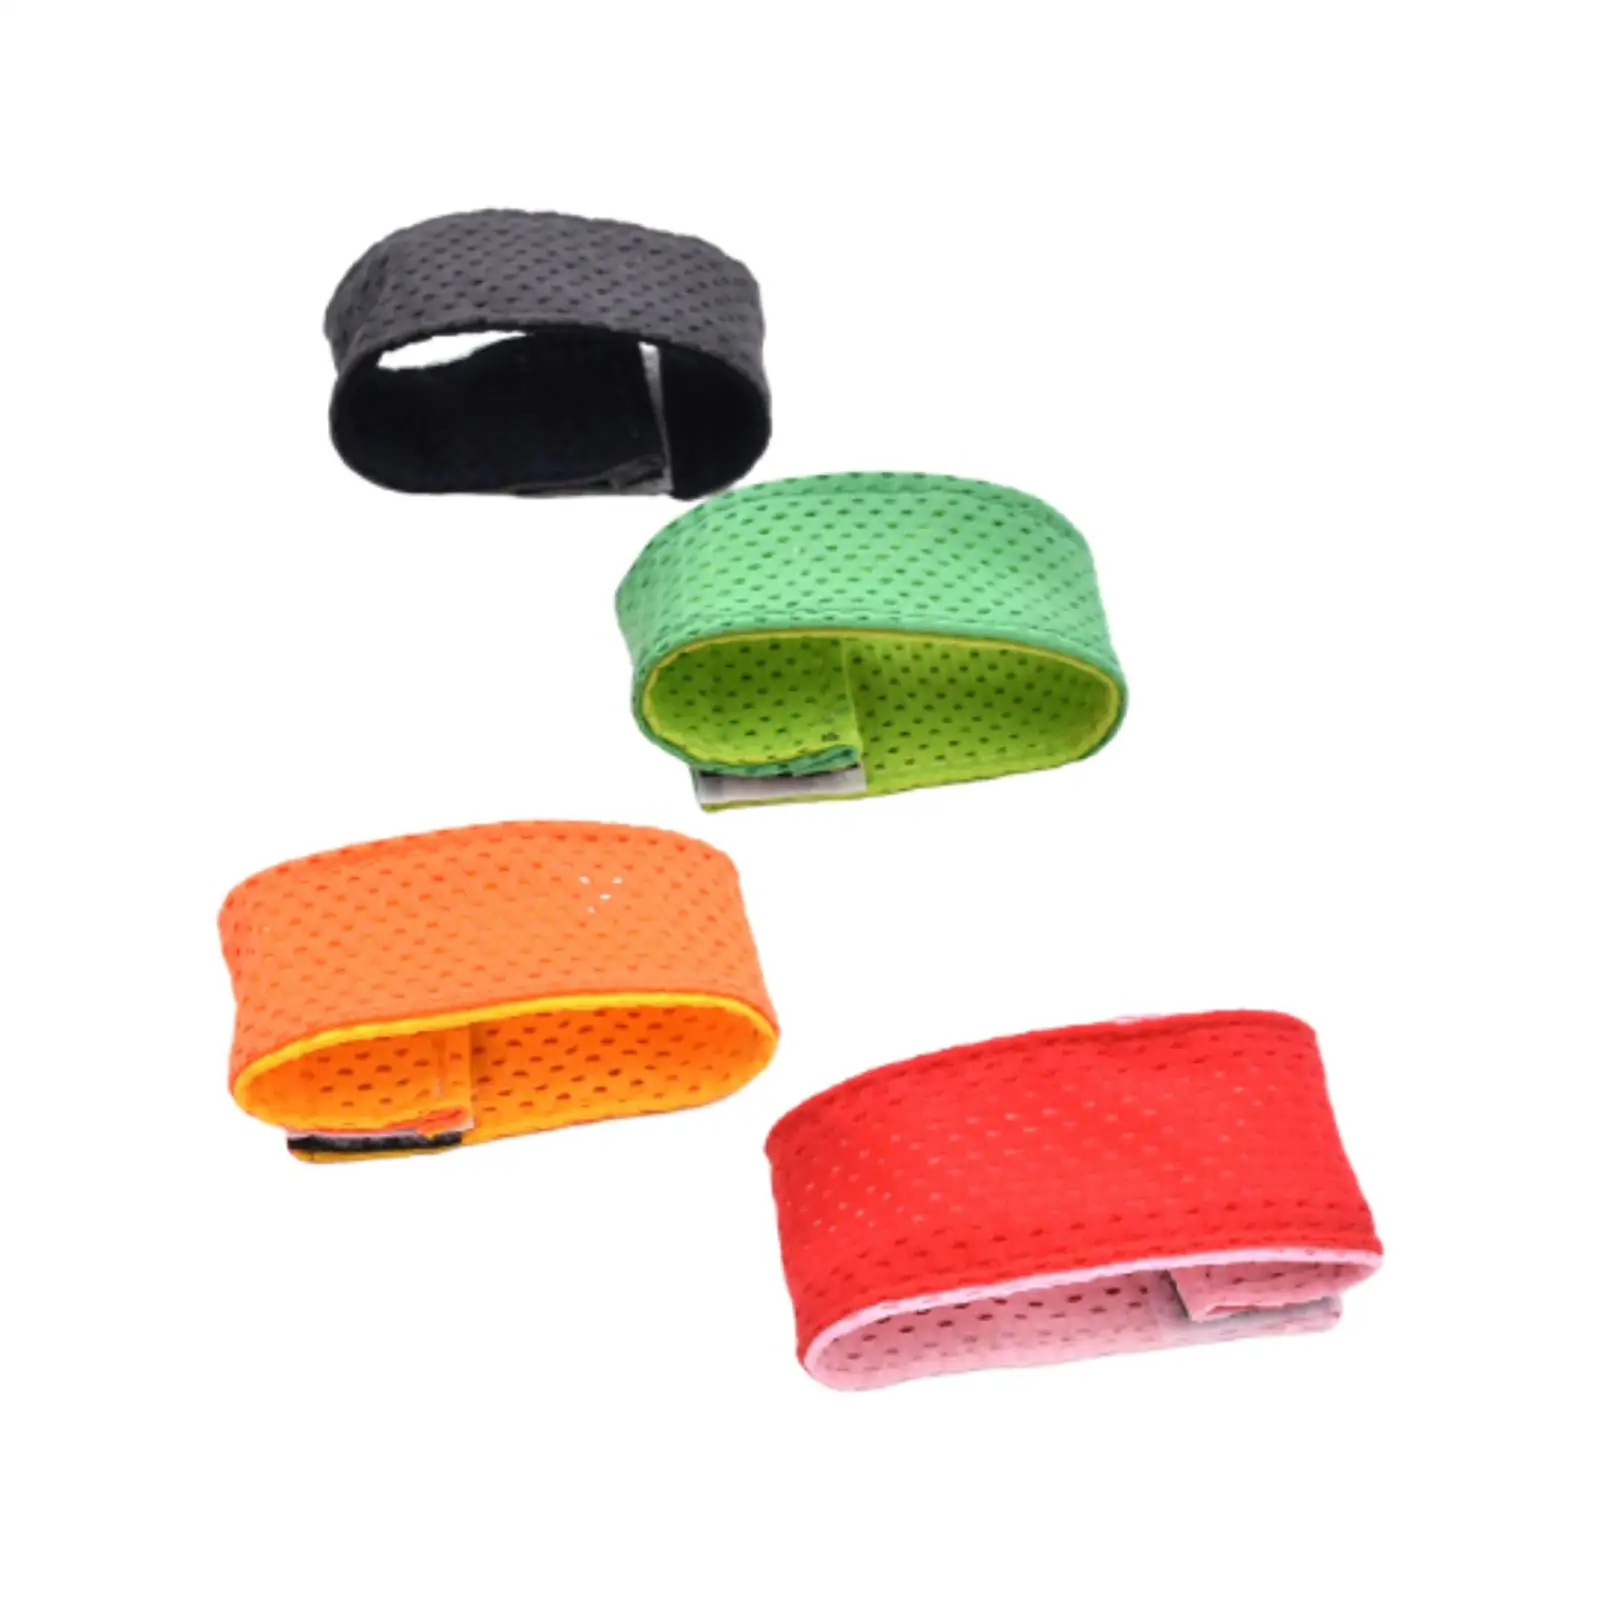 Shirt Sleeve Holders Unisex Elastic Armbands Cuff Hold Ups Cuff Clip Bands for Men Keeping Cuff from Sliding Party Wedding Women